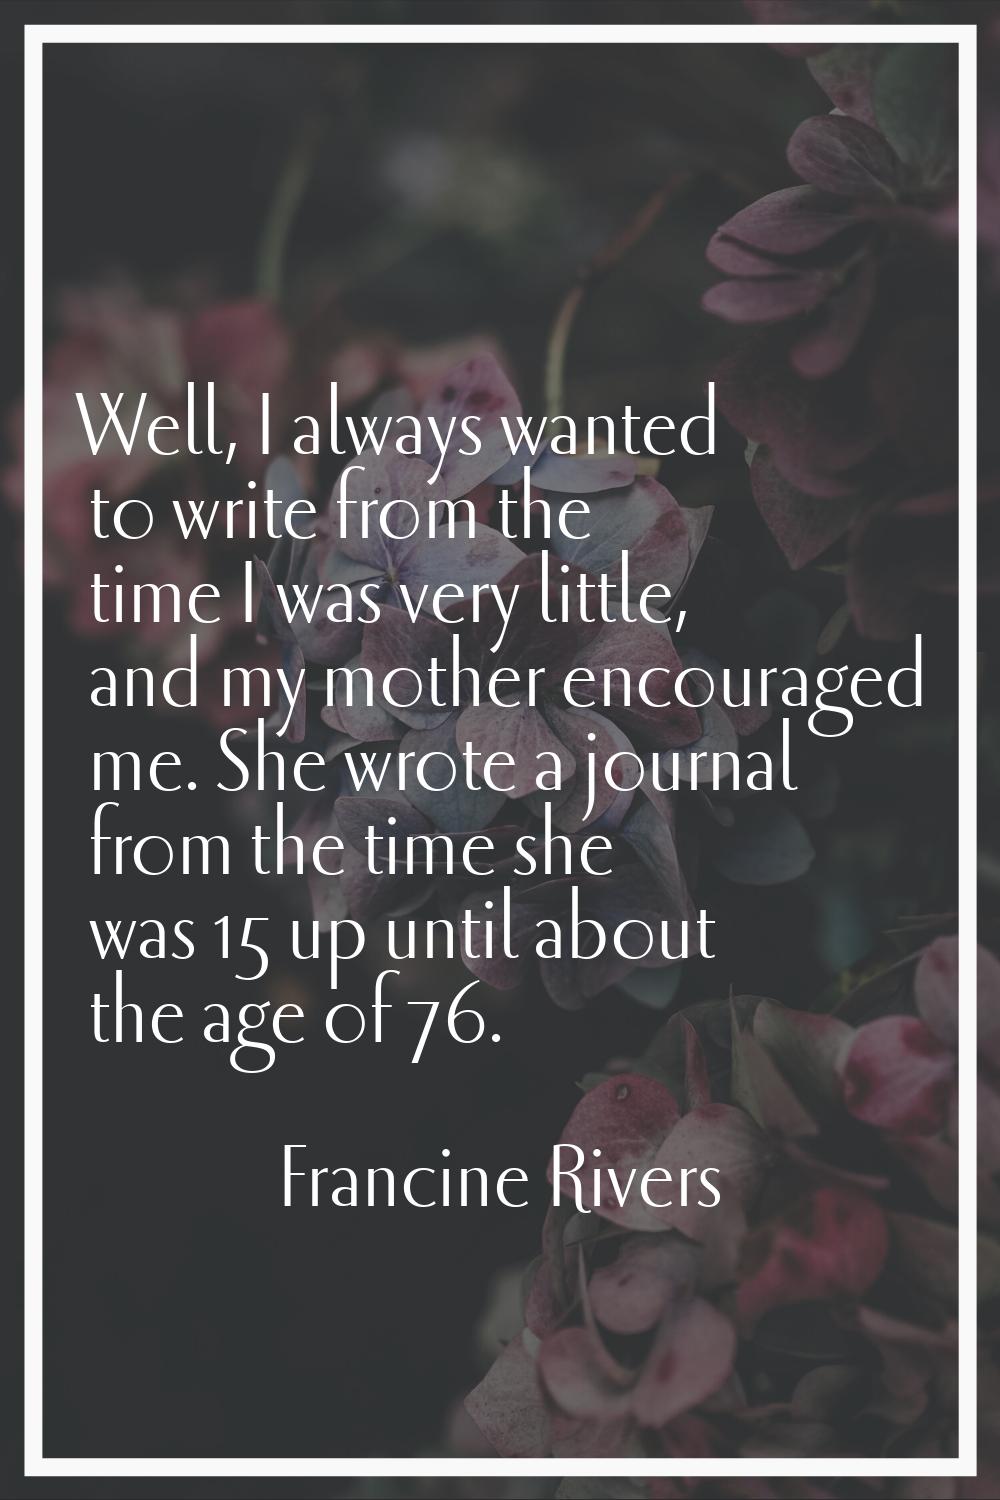 Well, I always wanted to write from the time I was very little, and my mother encouraged me. She wr